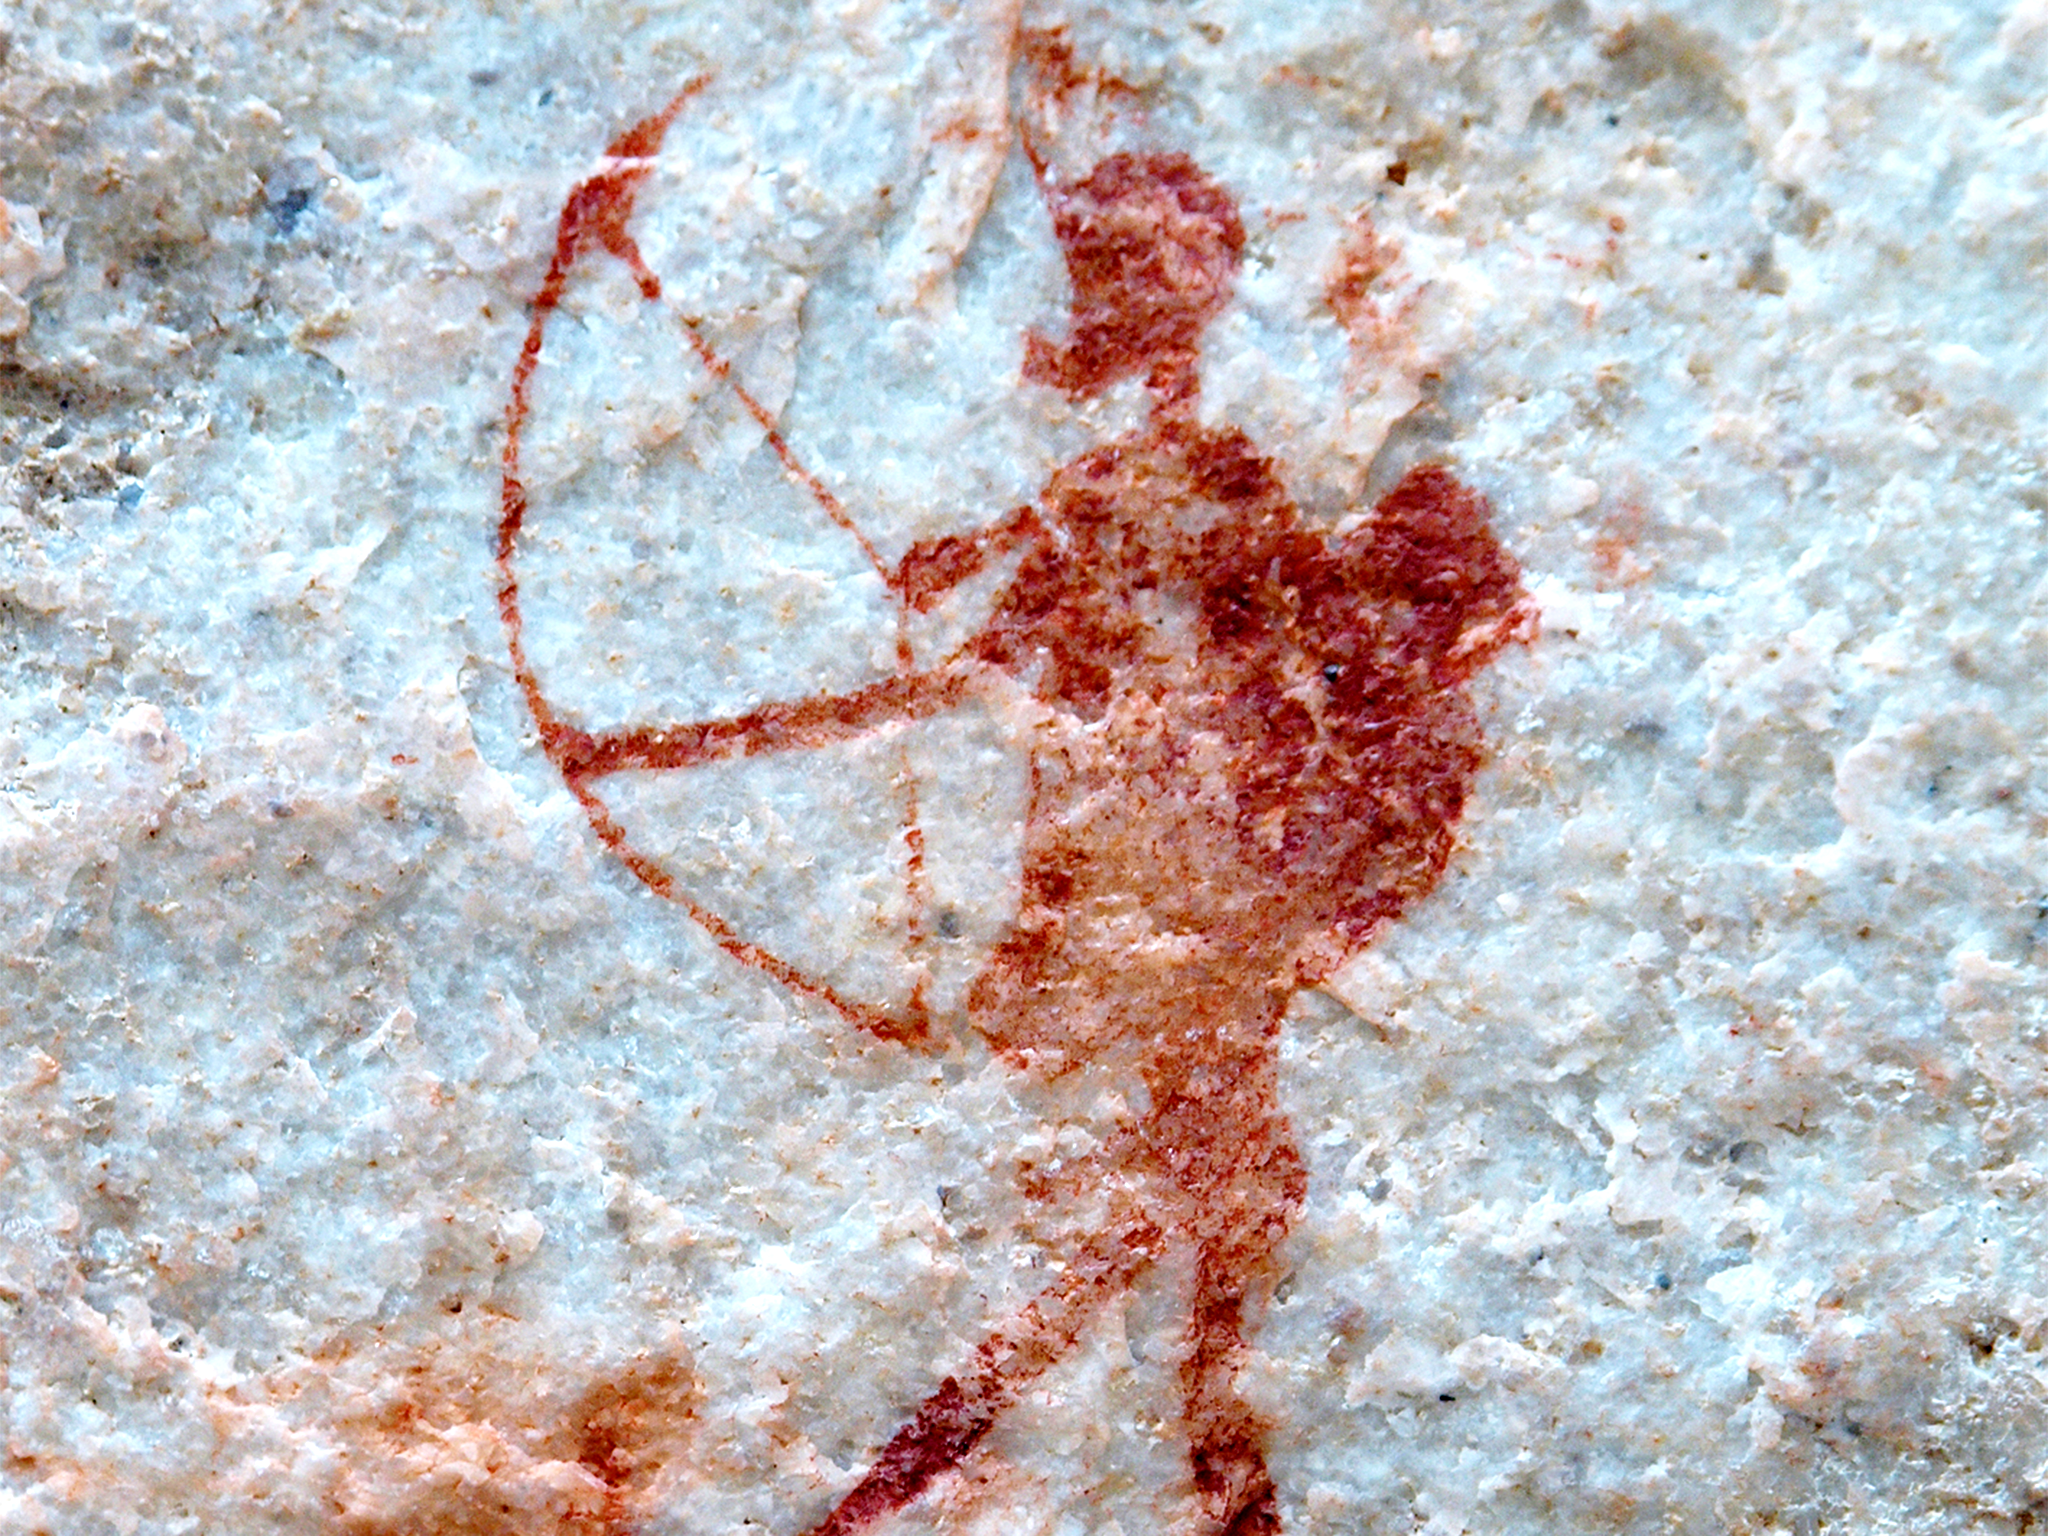 Humans have used bows and arrows for hunting for around 70,000 years – and the new research into the Jebel Sahaba skeletons proves that such weapons were being used in intercommunal warfare between hunter-gatherer groups probably from at least around 20,000 years ago. This image shows a prehistoric rock painting depicting a southern African San archer in Cederberg Mountains, South Africa.